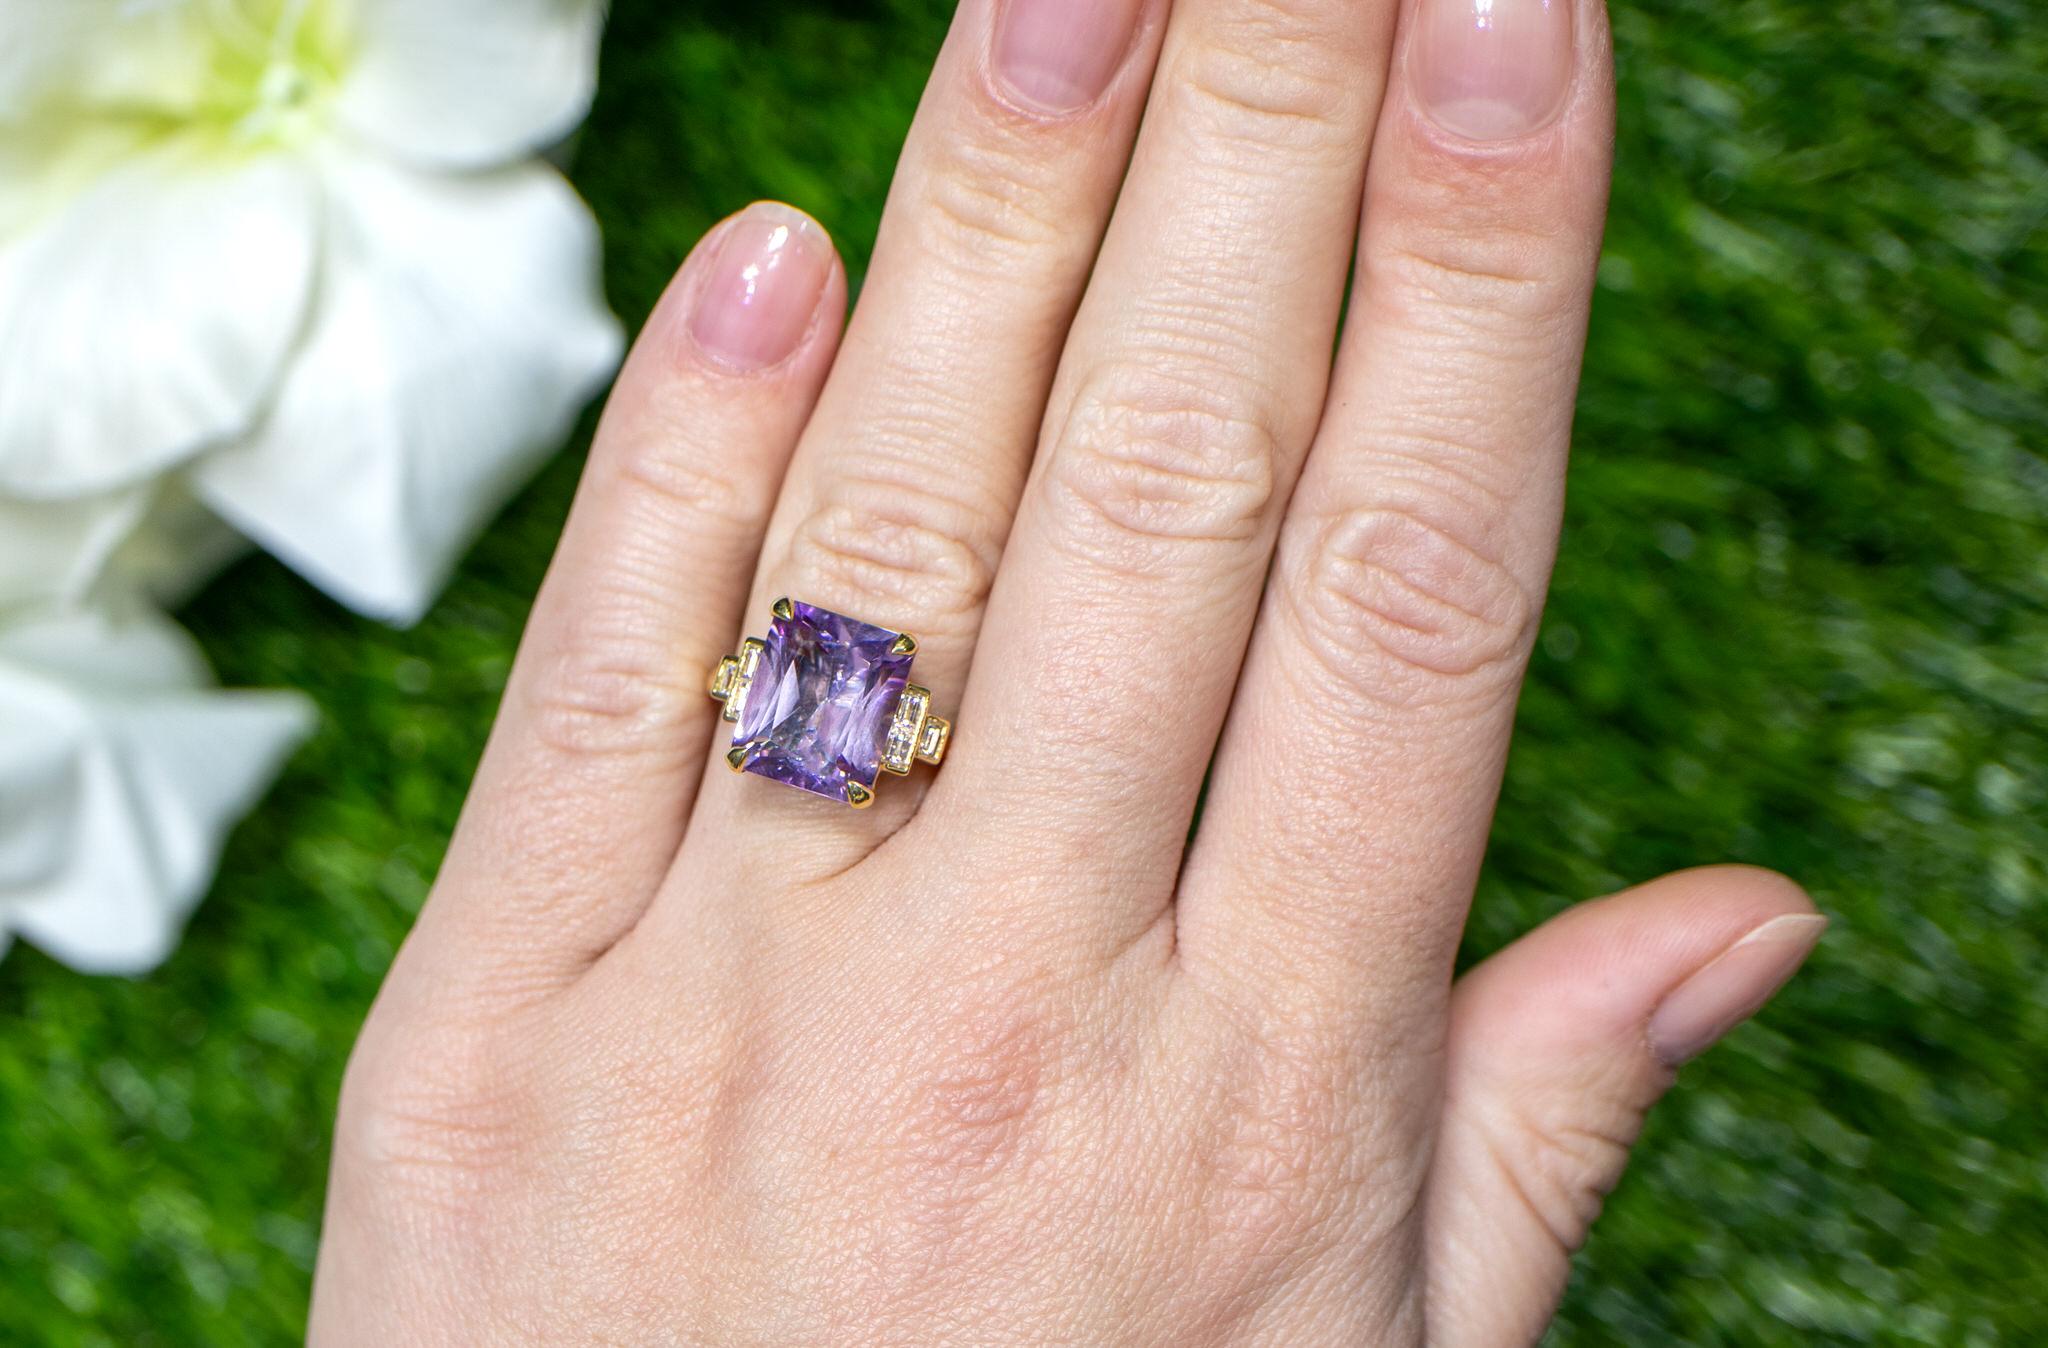 It comes with the Gemological Appraisal by GIA GG/AJP
All Gemstones are Natural
Lavender Amethyst = 5.35 Carats
Diamonds = 0.30 Carats
Metal: 18K Yellow Gold
Ring Size: 6.5* US
*It can be resized complimentary